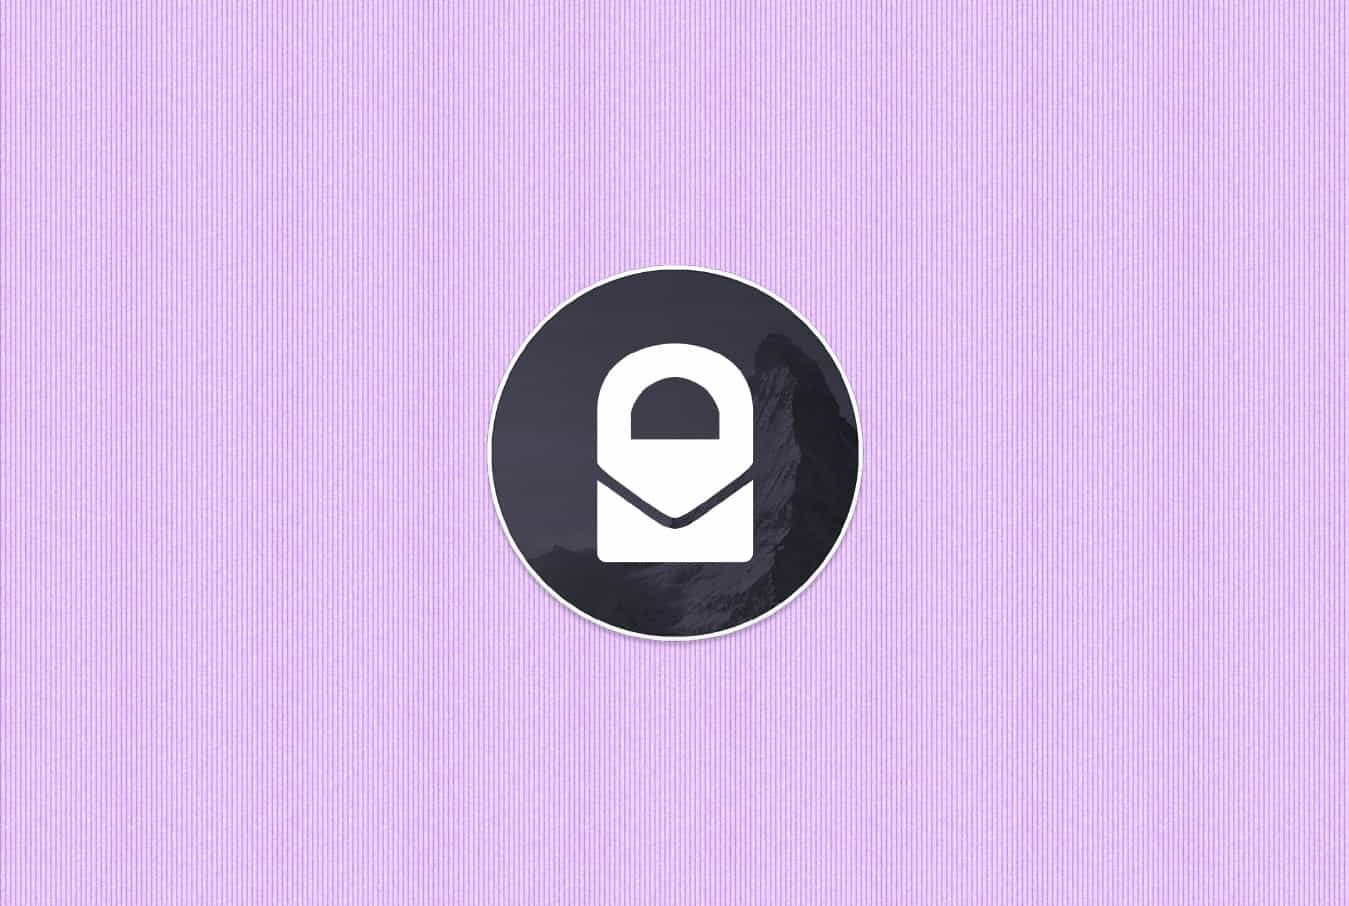 ProtonMail denies that it offer real-time surveillance assistance